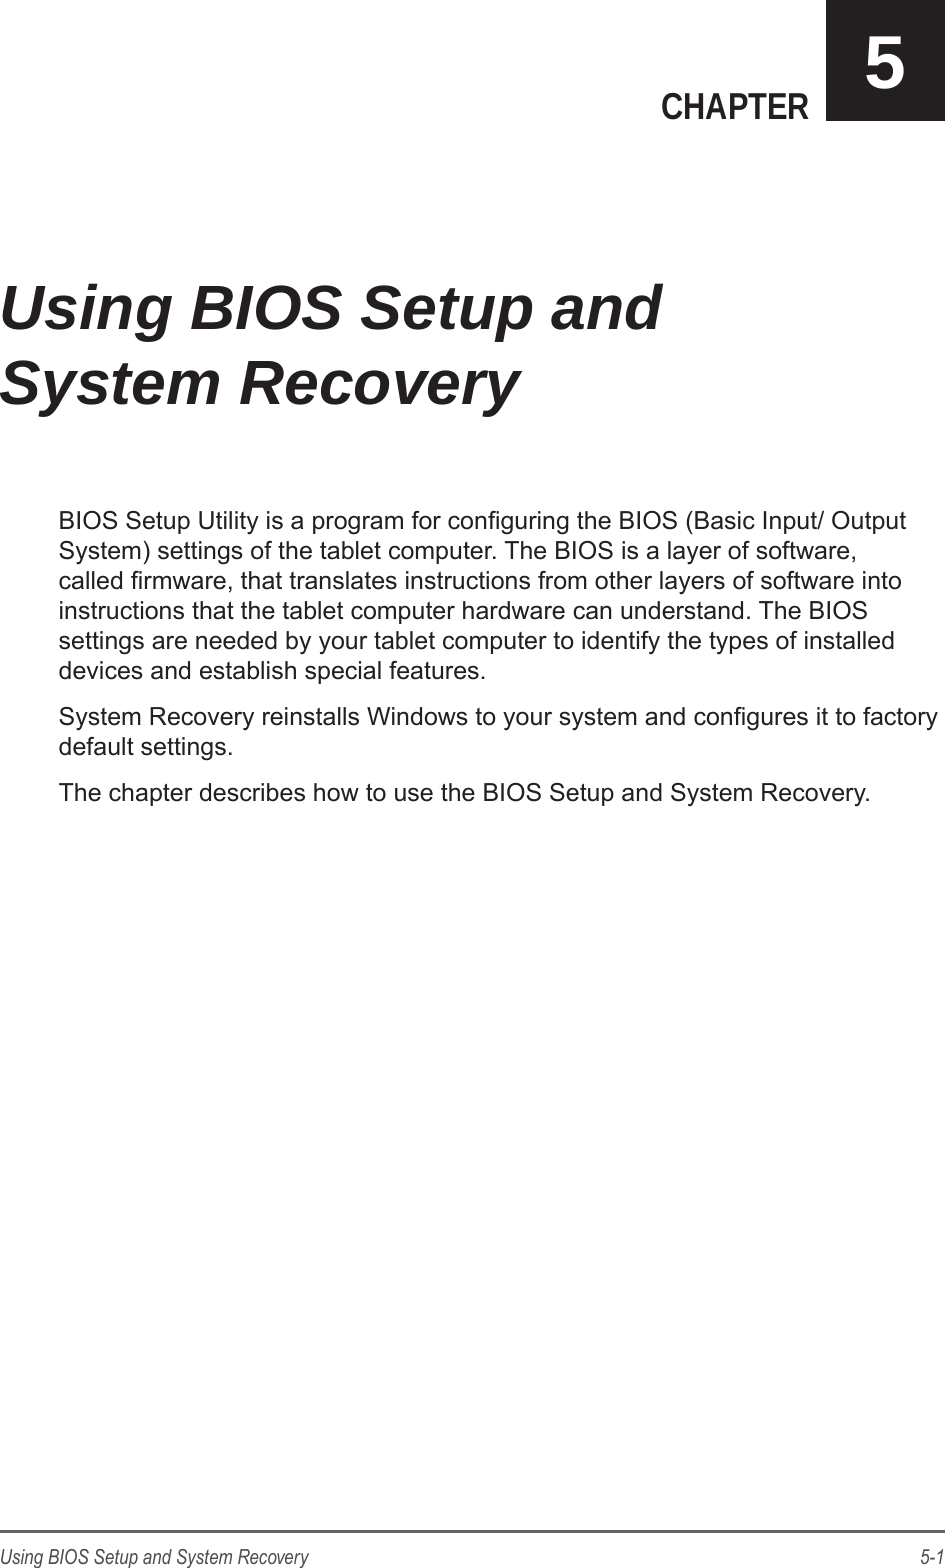 5-1Using BIOS Setup and System RecoveryCHAPTER 5BIOS Setup Utility is a program for conguring the BIOS (Basic Input/ Output System) settings of the tablet computer. The BIOS is a layer of software, called rmware, that translates instructions from other layers of software into instructions that the tablet computer hardware can understand. The BIOS settings are needed by your tablet computer to identify the types of installed devices and establish special features.System Recovery reinstalls Windows to your system and congures it to factory default settings.The chapter describes how to use the BIOS Setup and System Recovery.Using BIOS Setup and System Recovery